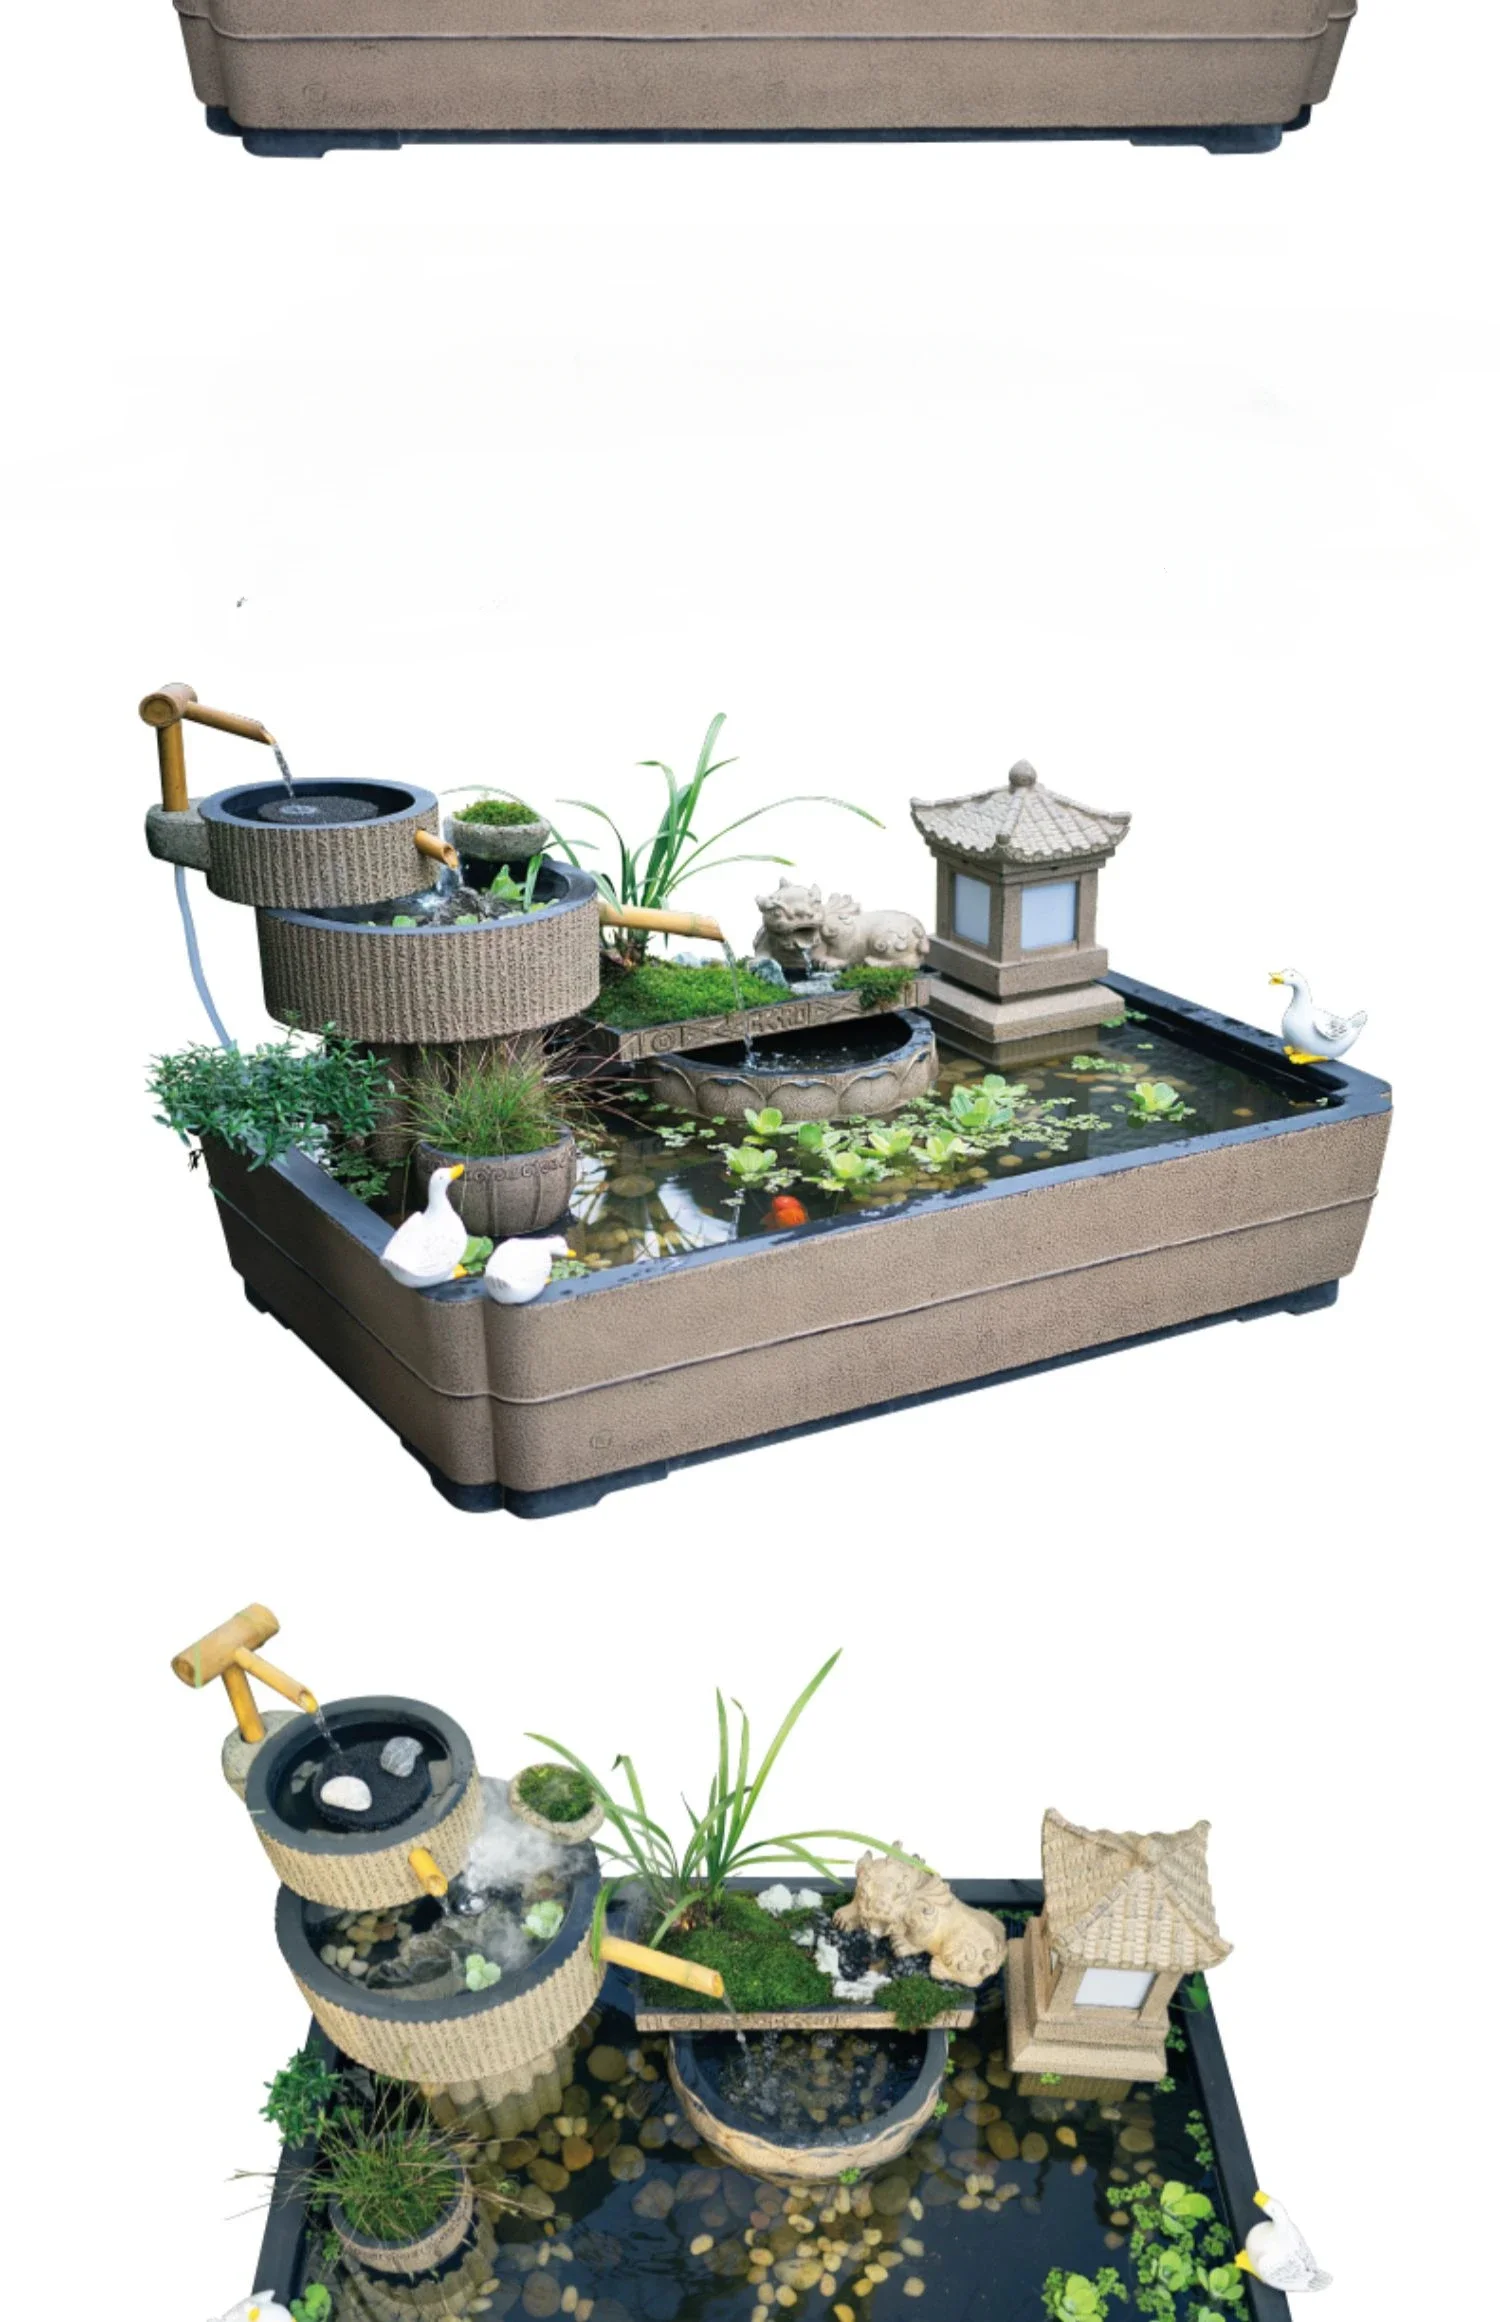 

Chinese balcony garden layout outdoor courtyard flowing water fish pond rockery landscaping fish tank landscape ornaments